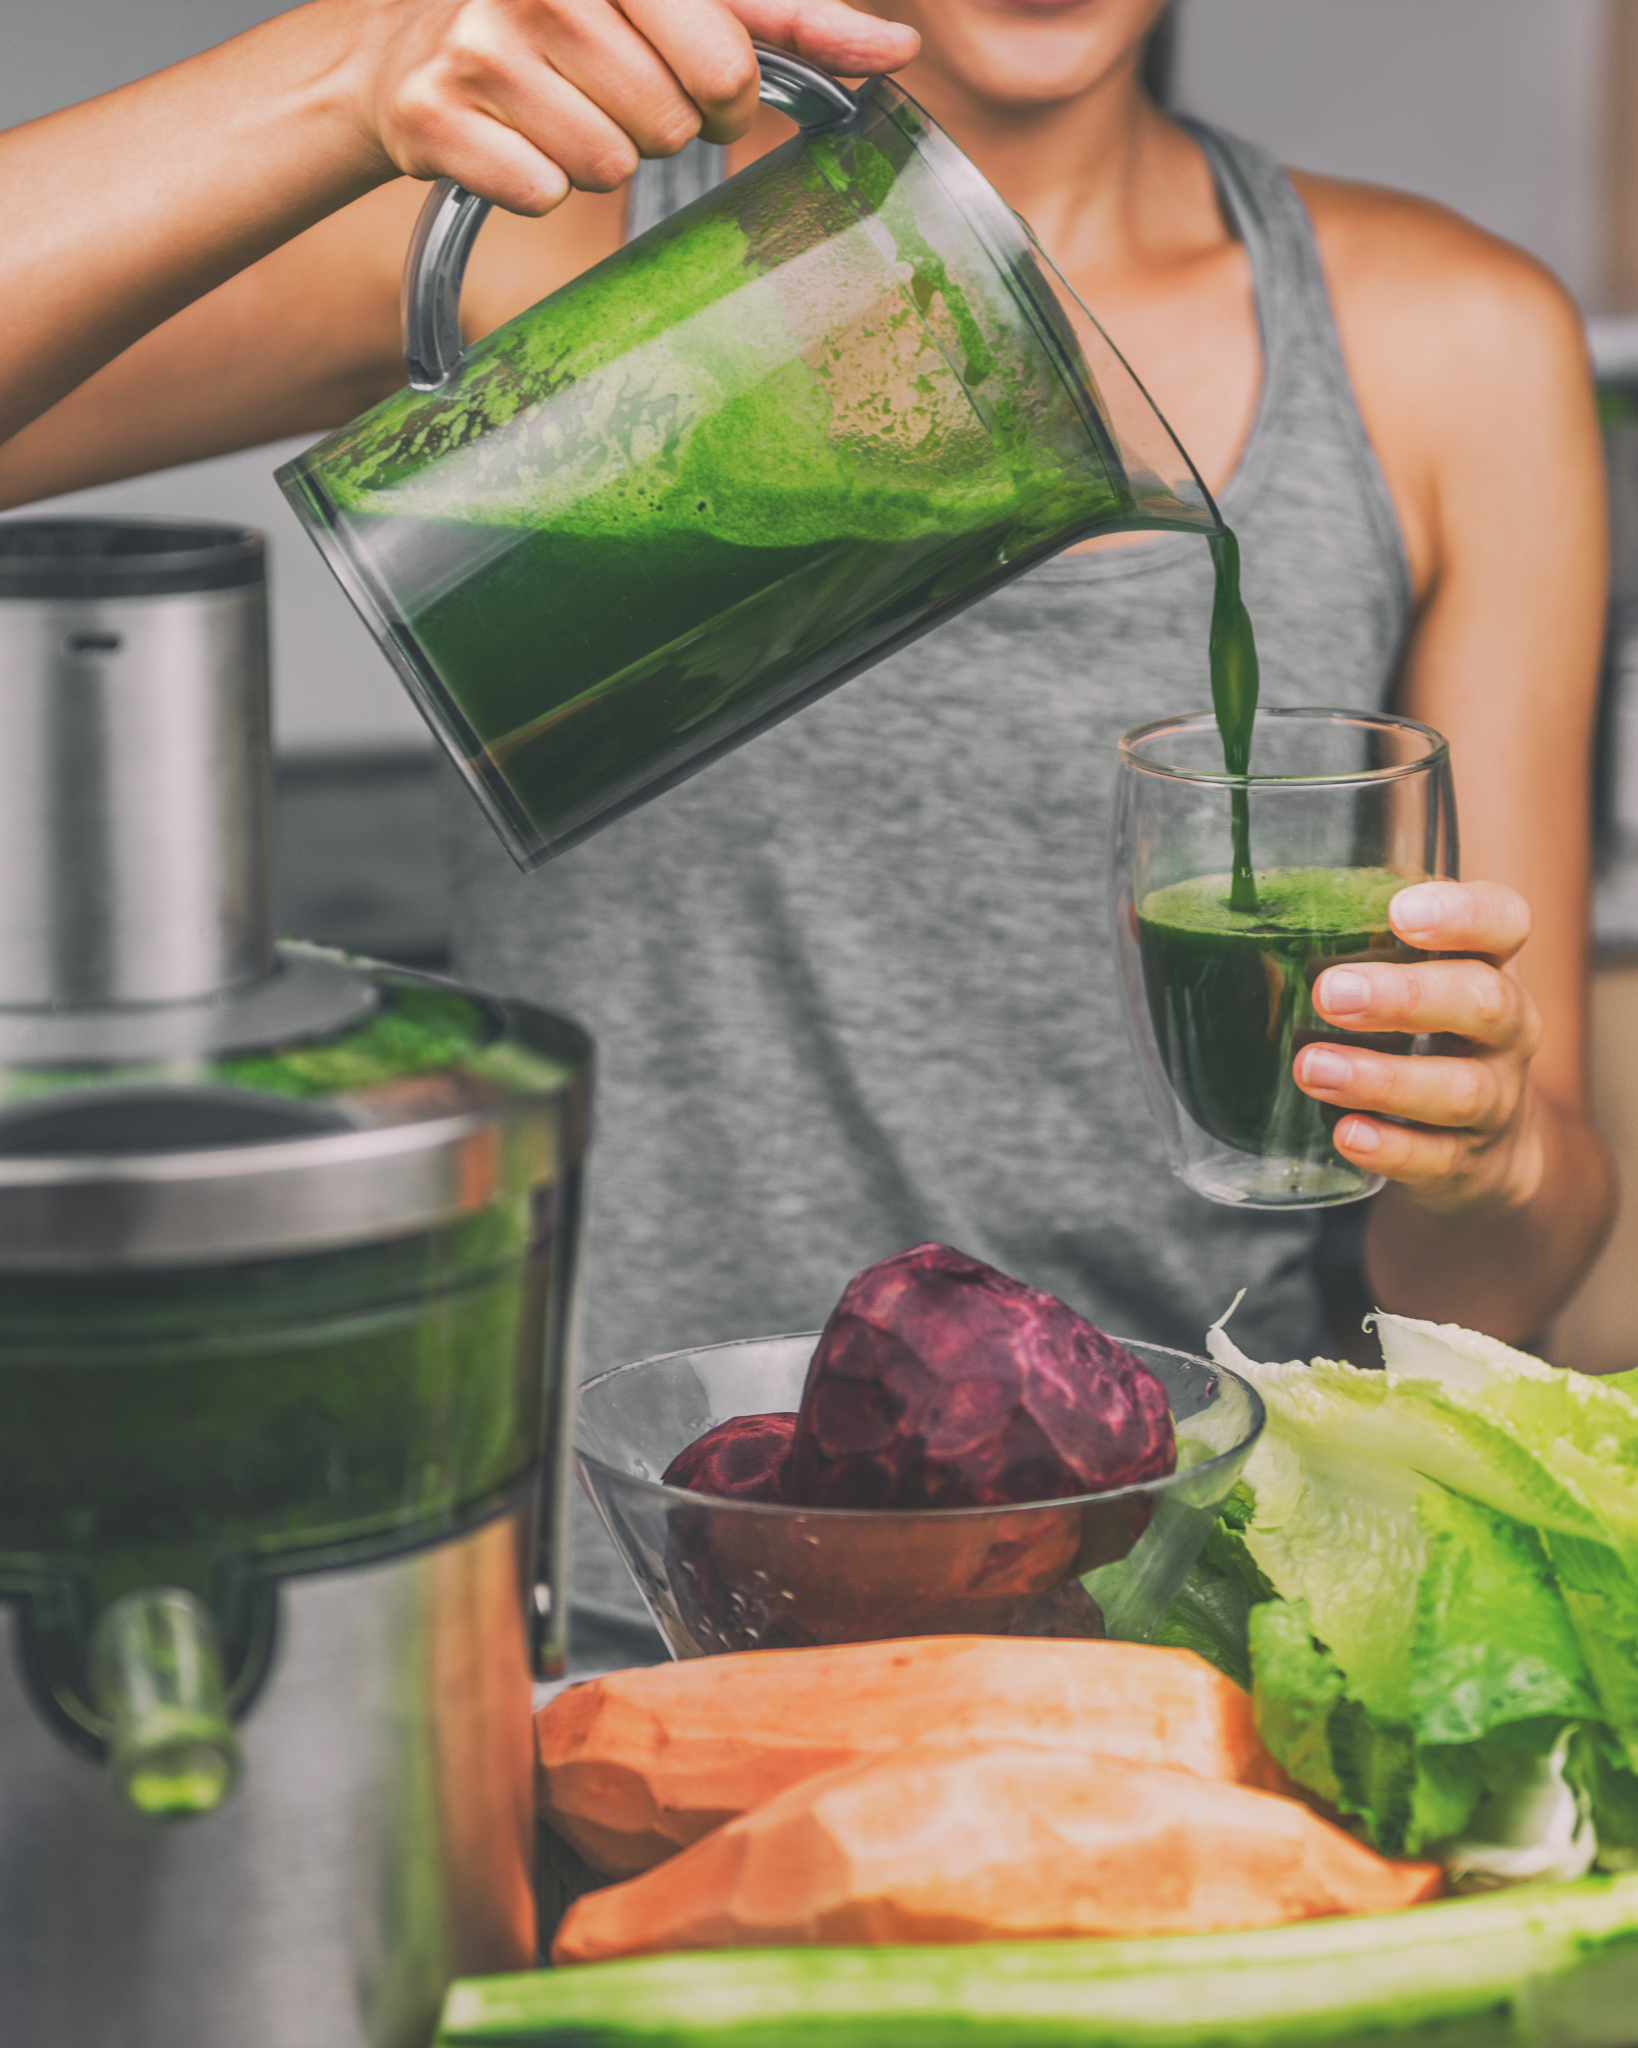 Nourishing Your Body: How Juicing Can Help Fight Disease